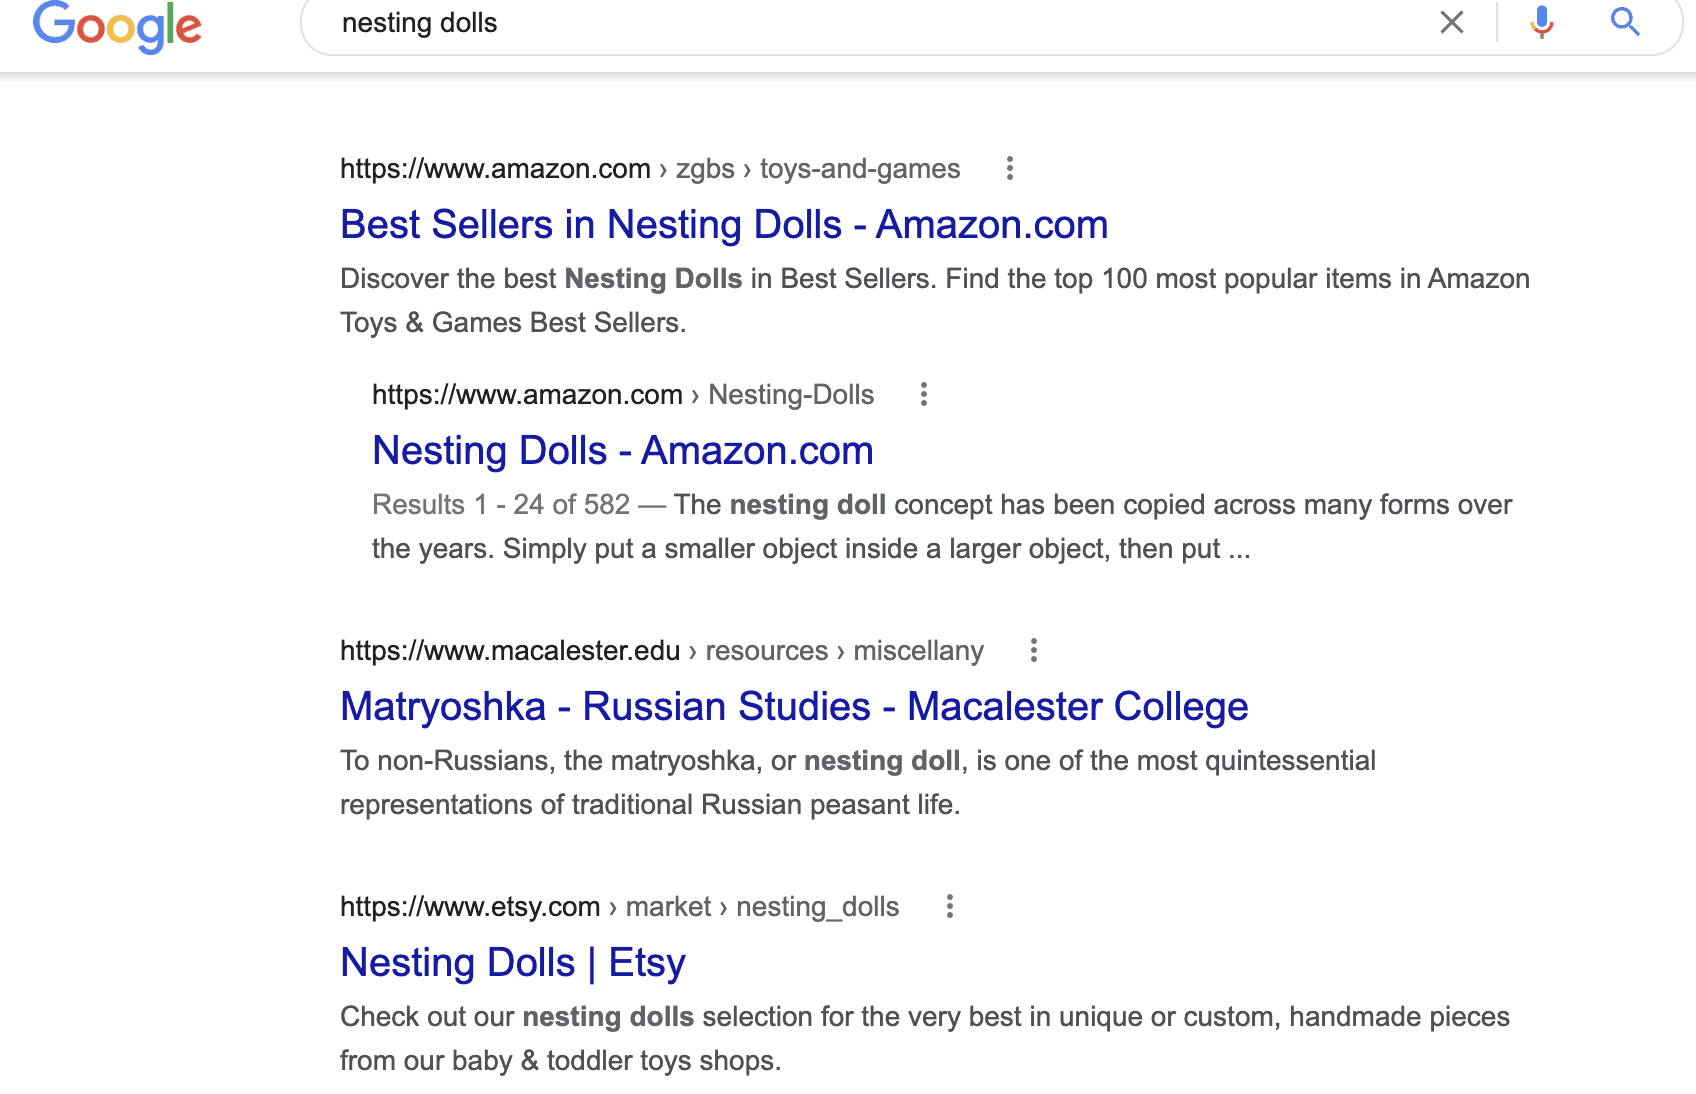 Nesting dolls Google search results